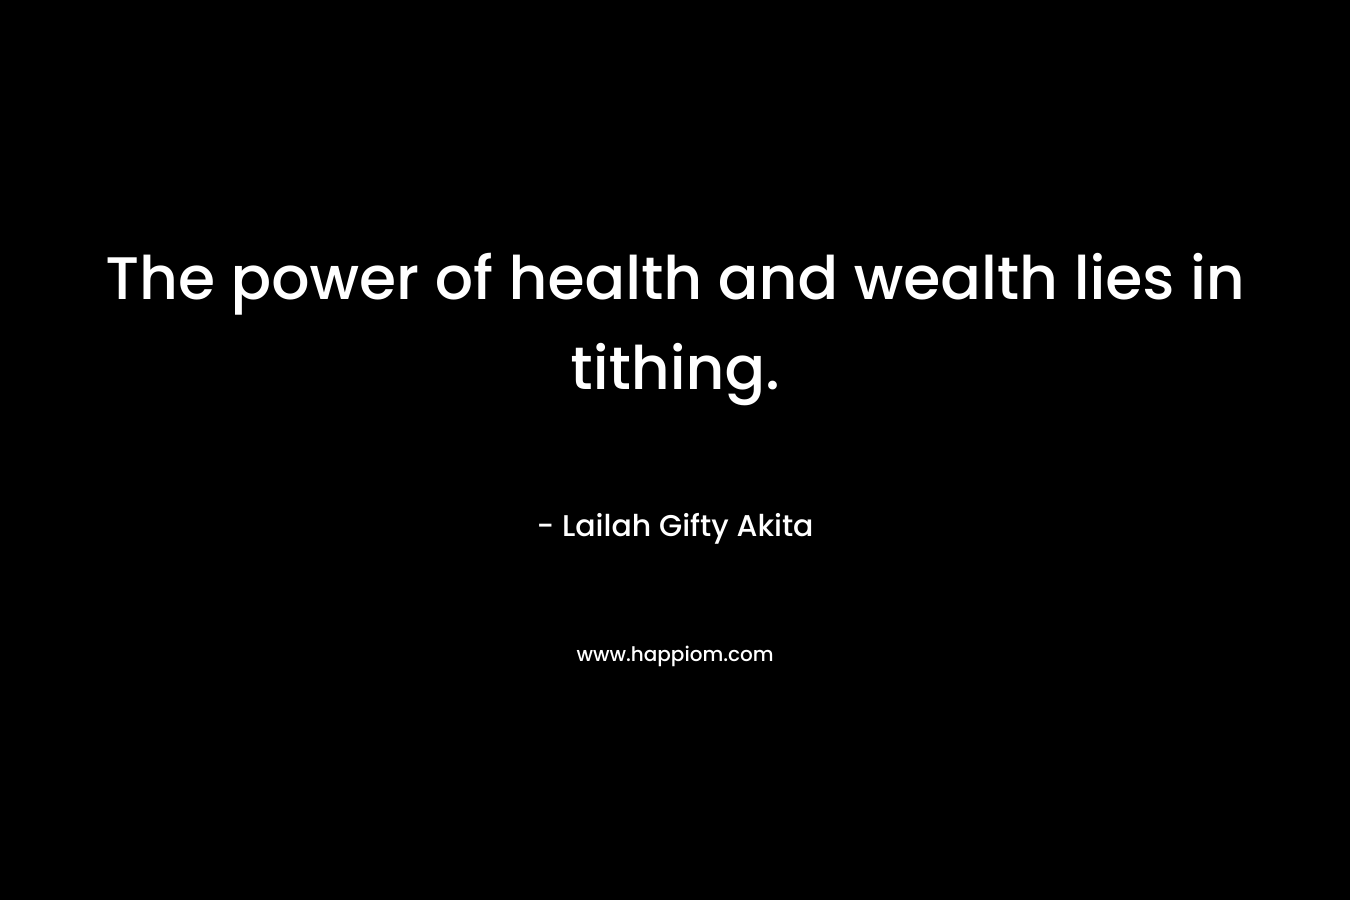 The power of health and wealth lies in tithing. – Lailah Gifty Akita